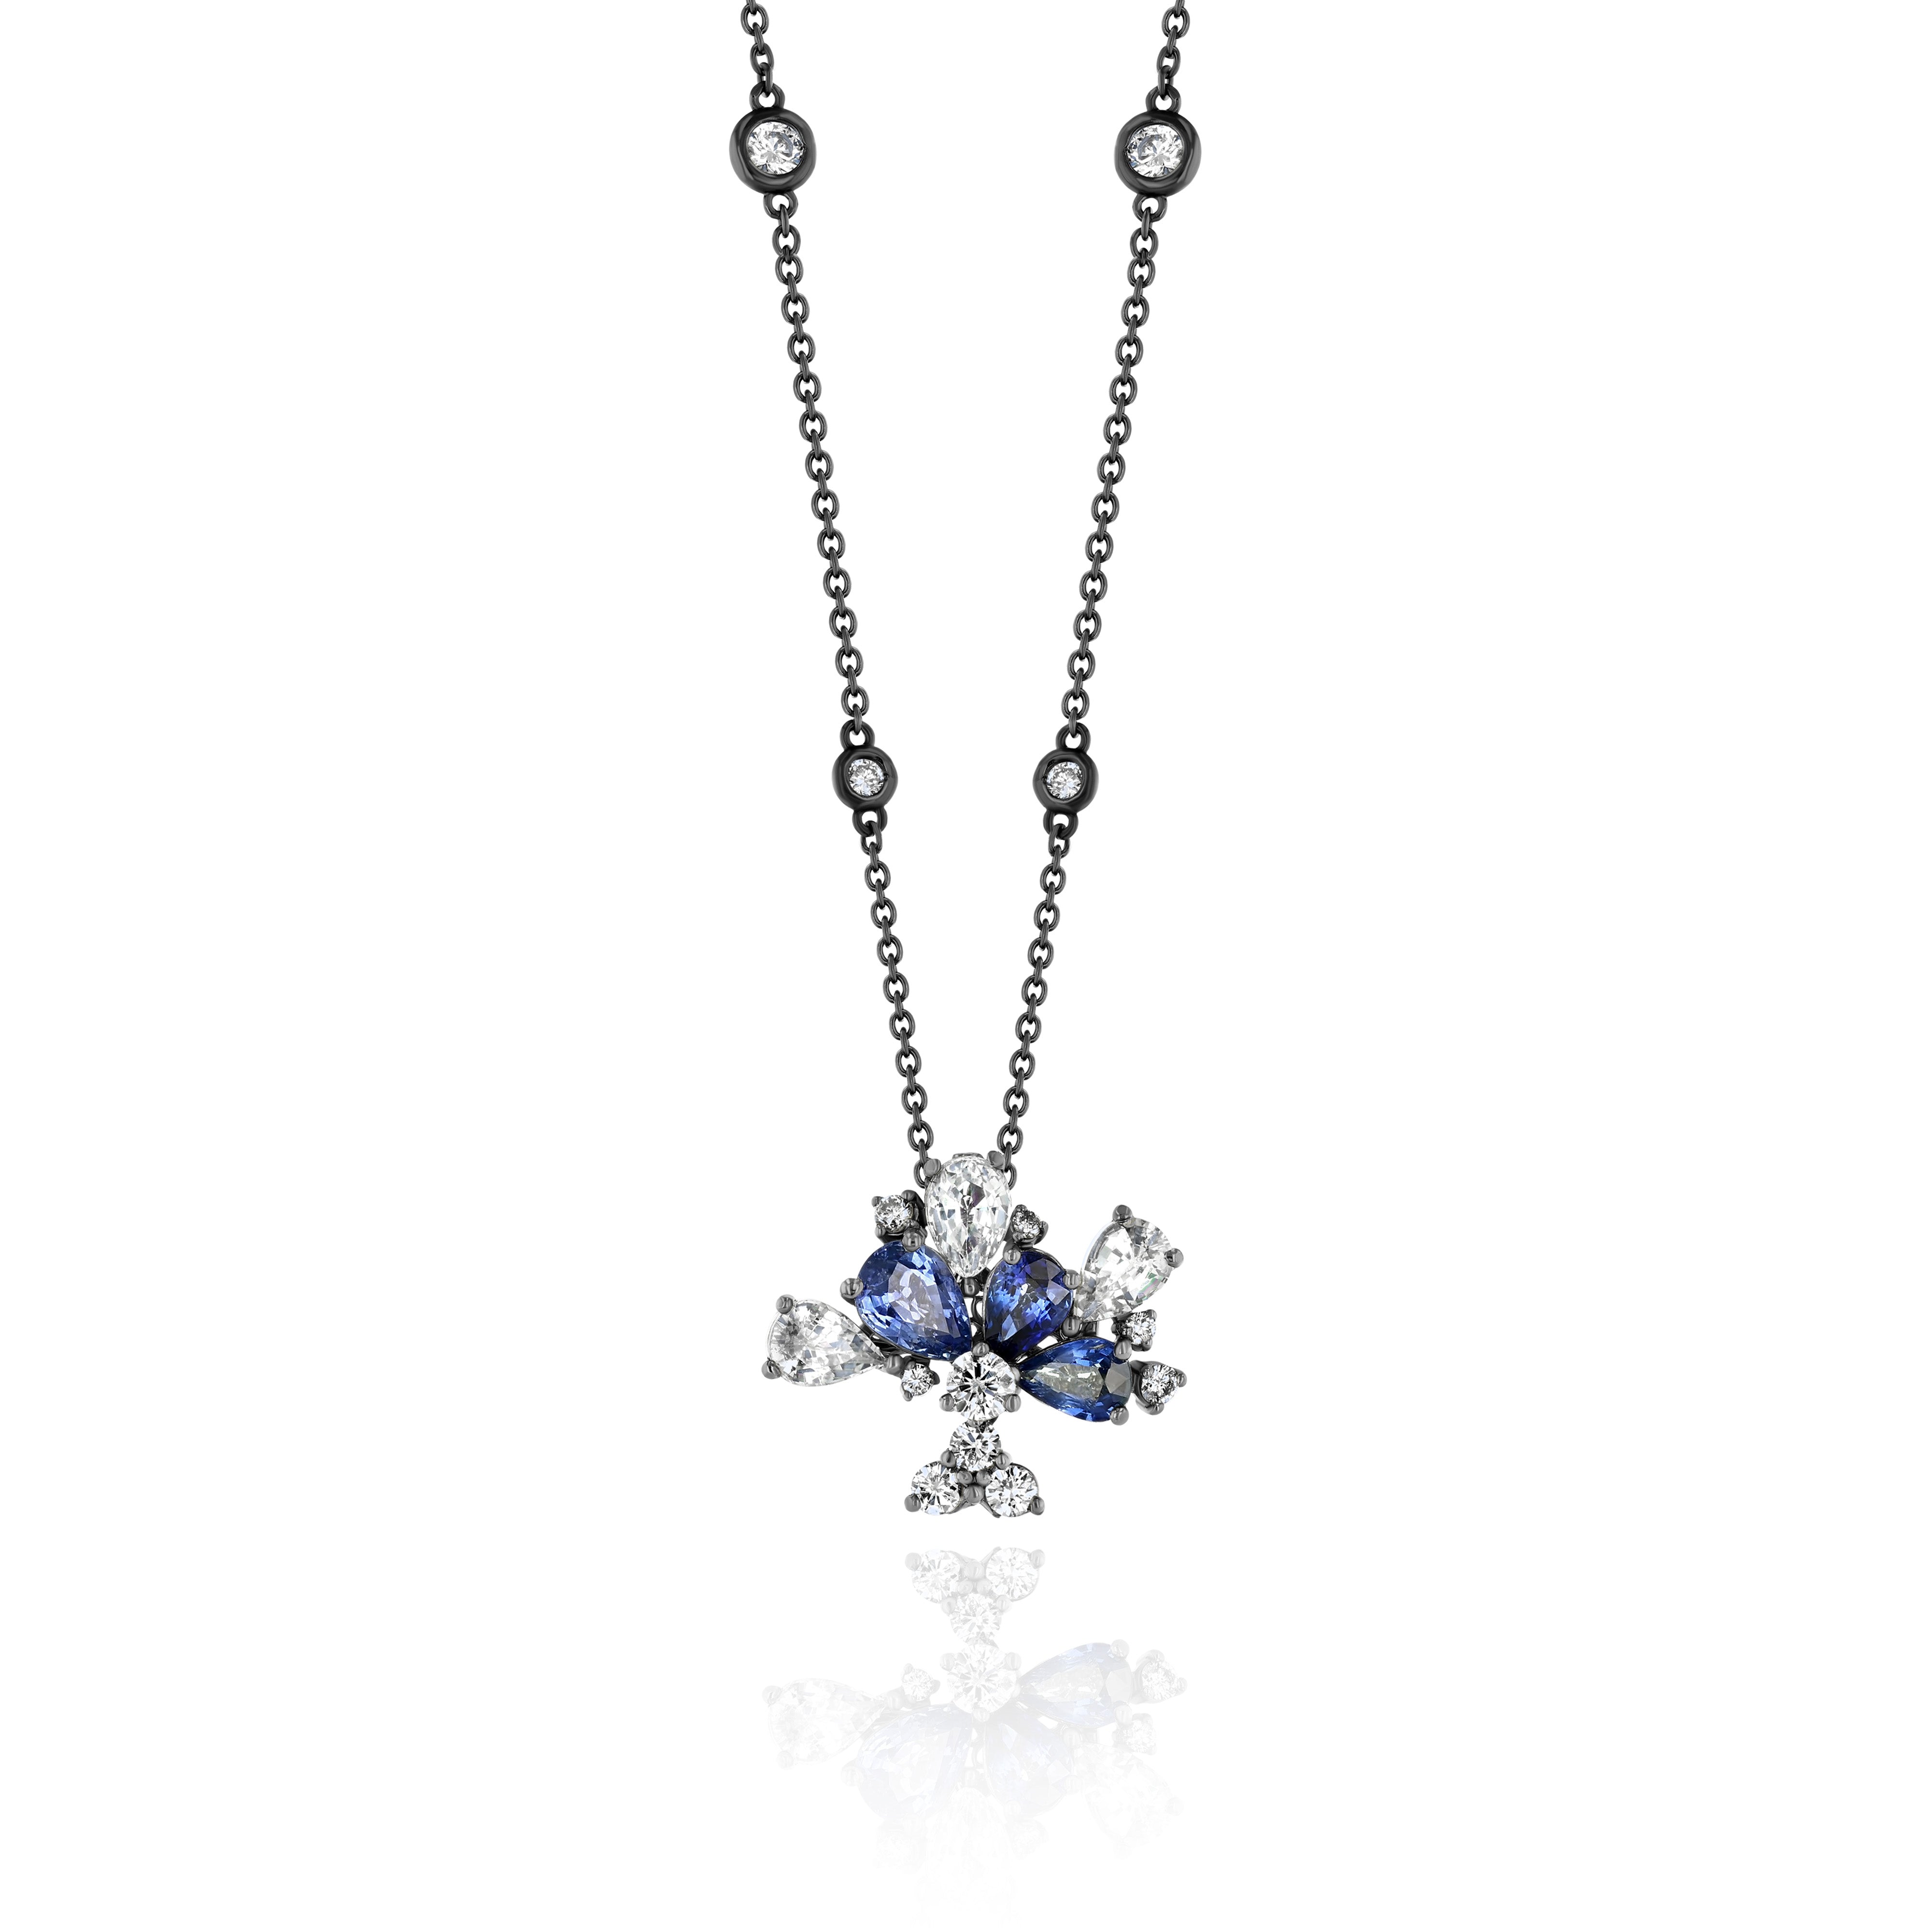 Rhodium Plated Gold Necklace with Blue and White Sapphires, and Diamonds, Medium